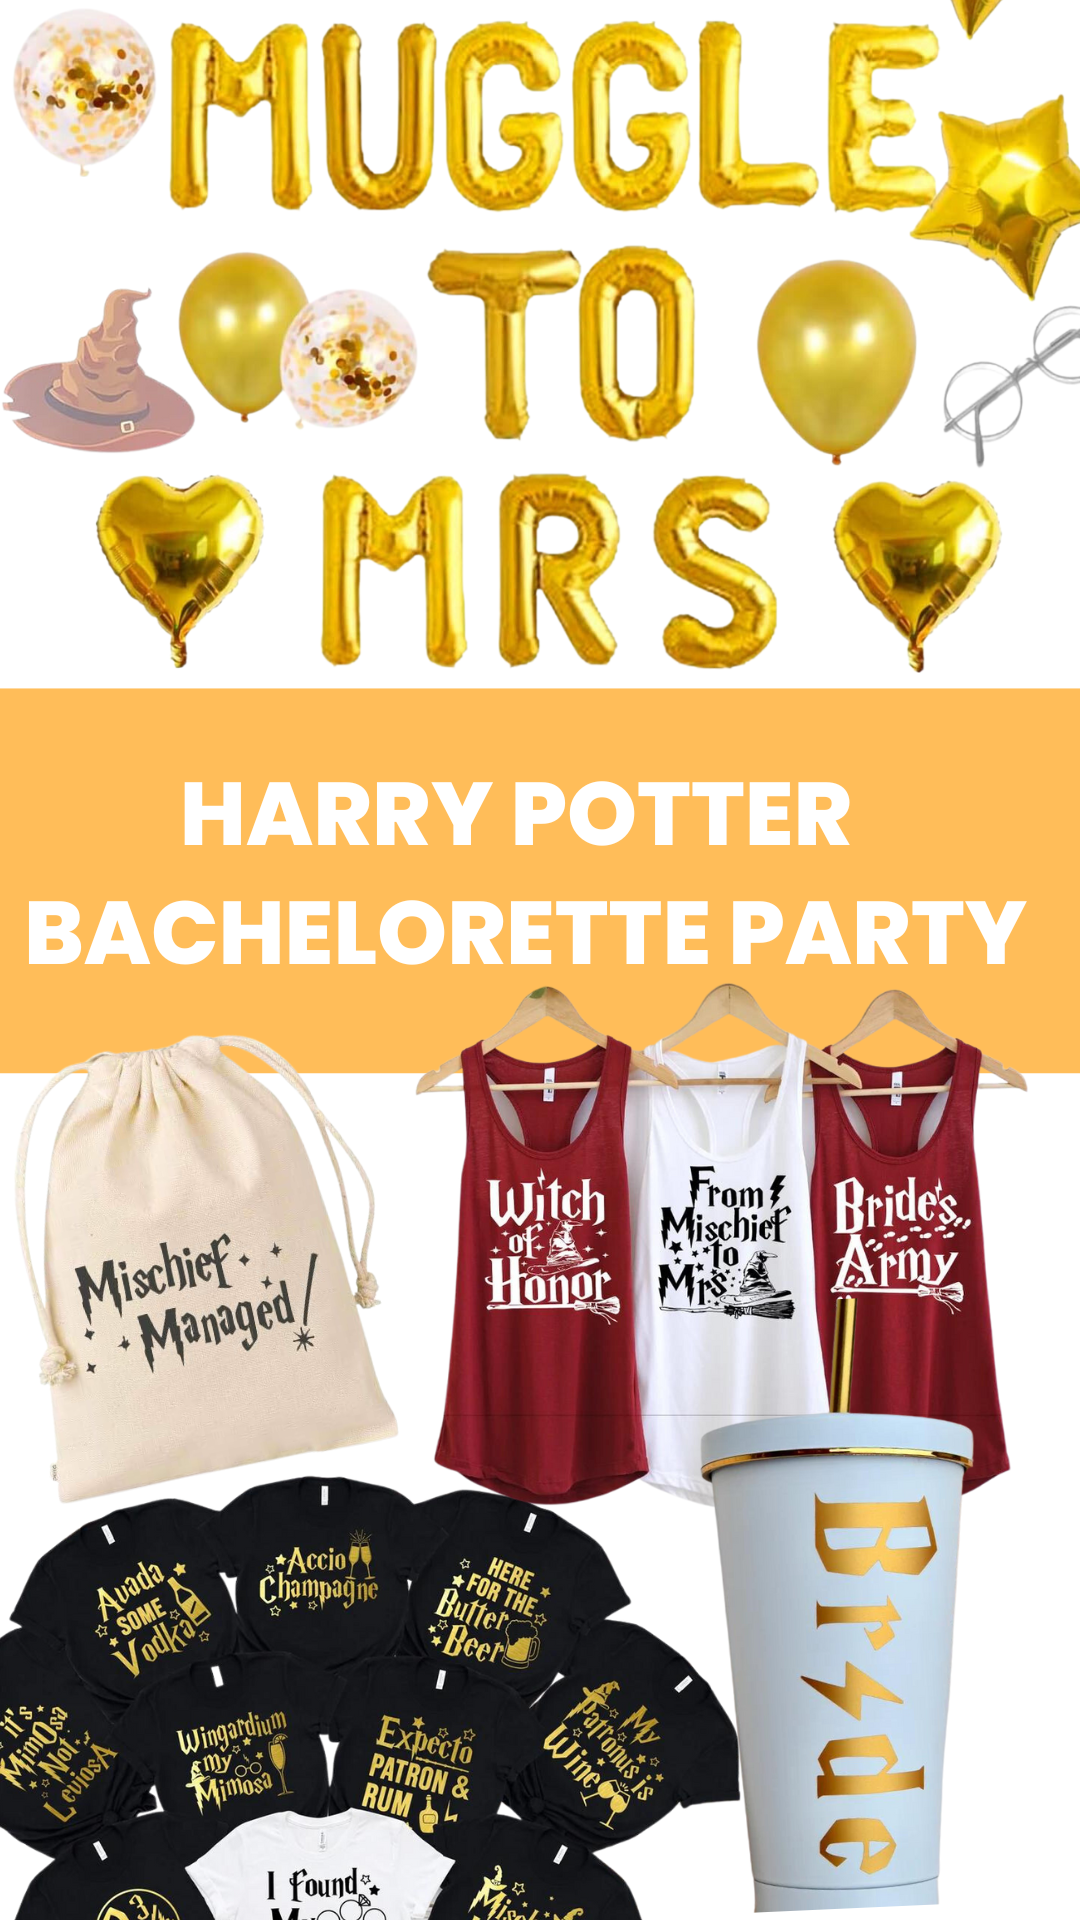 Harry Potter Party Favors Goodie Bags  Harry potter theme birthday, Harry  potter theme party, Harry potter party favors